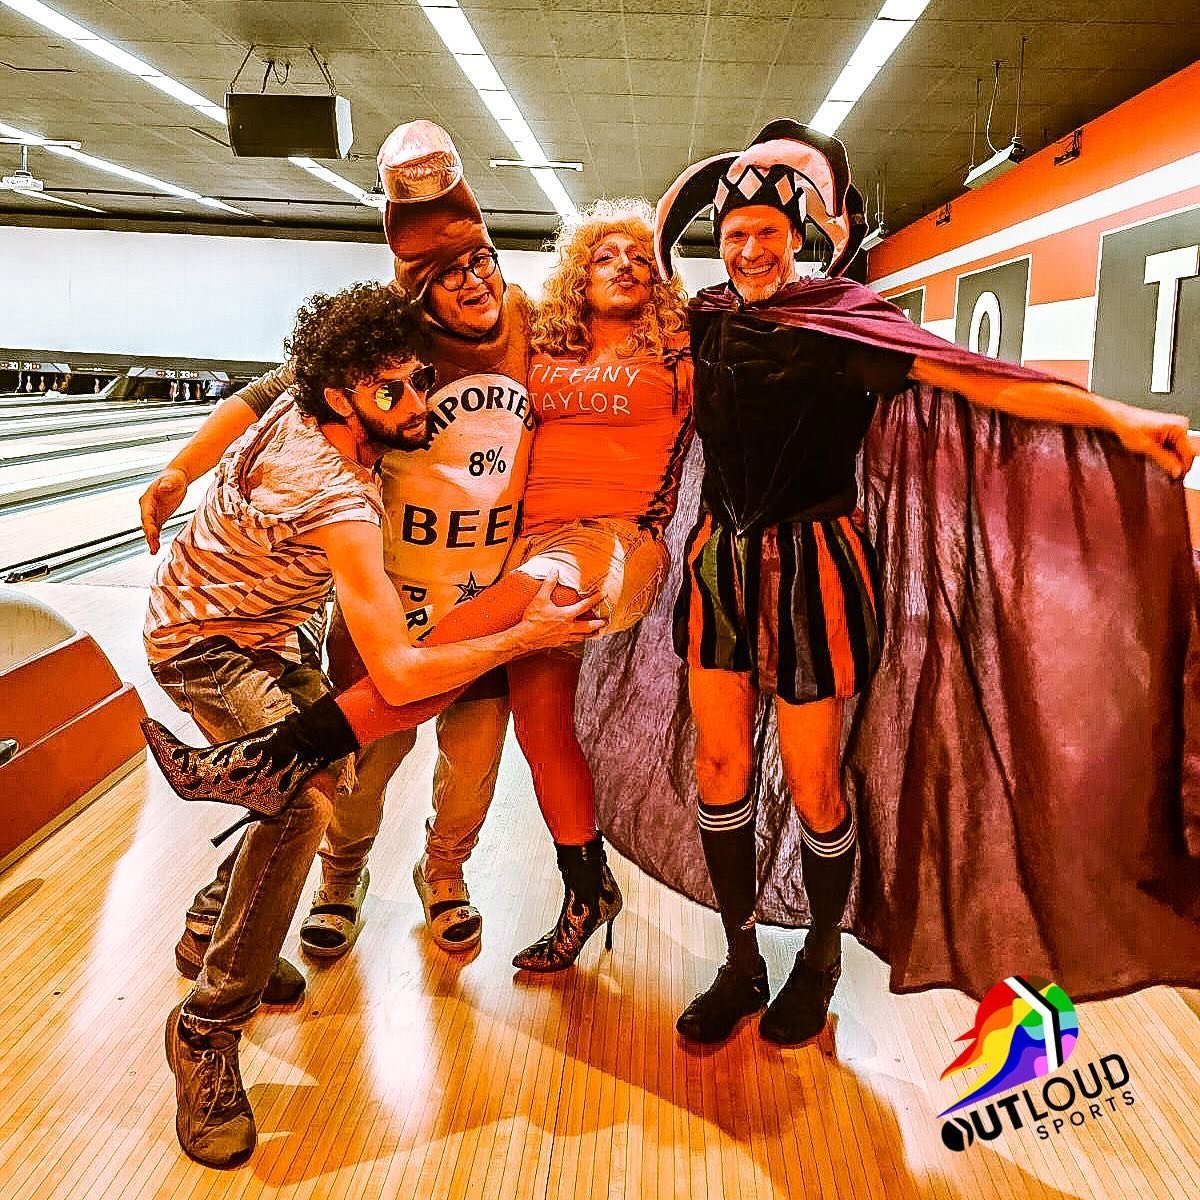 Congrats to Gutter Done for best team costume at last night&rsquo;s Halloween themed league bowling night! 🎃 🎳 👻 #outloudsports #milehighbowling #cantevenbowlstraight